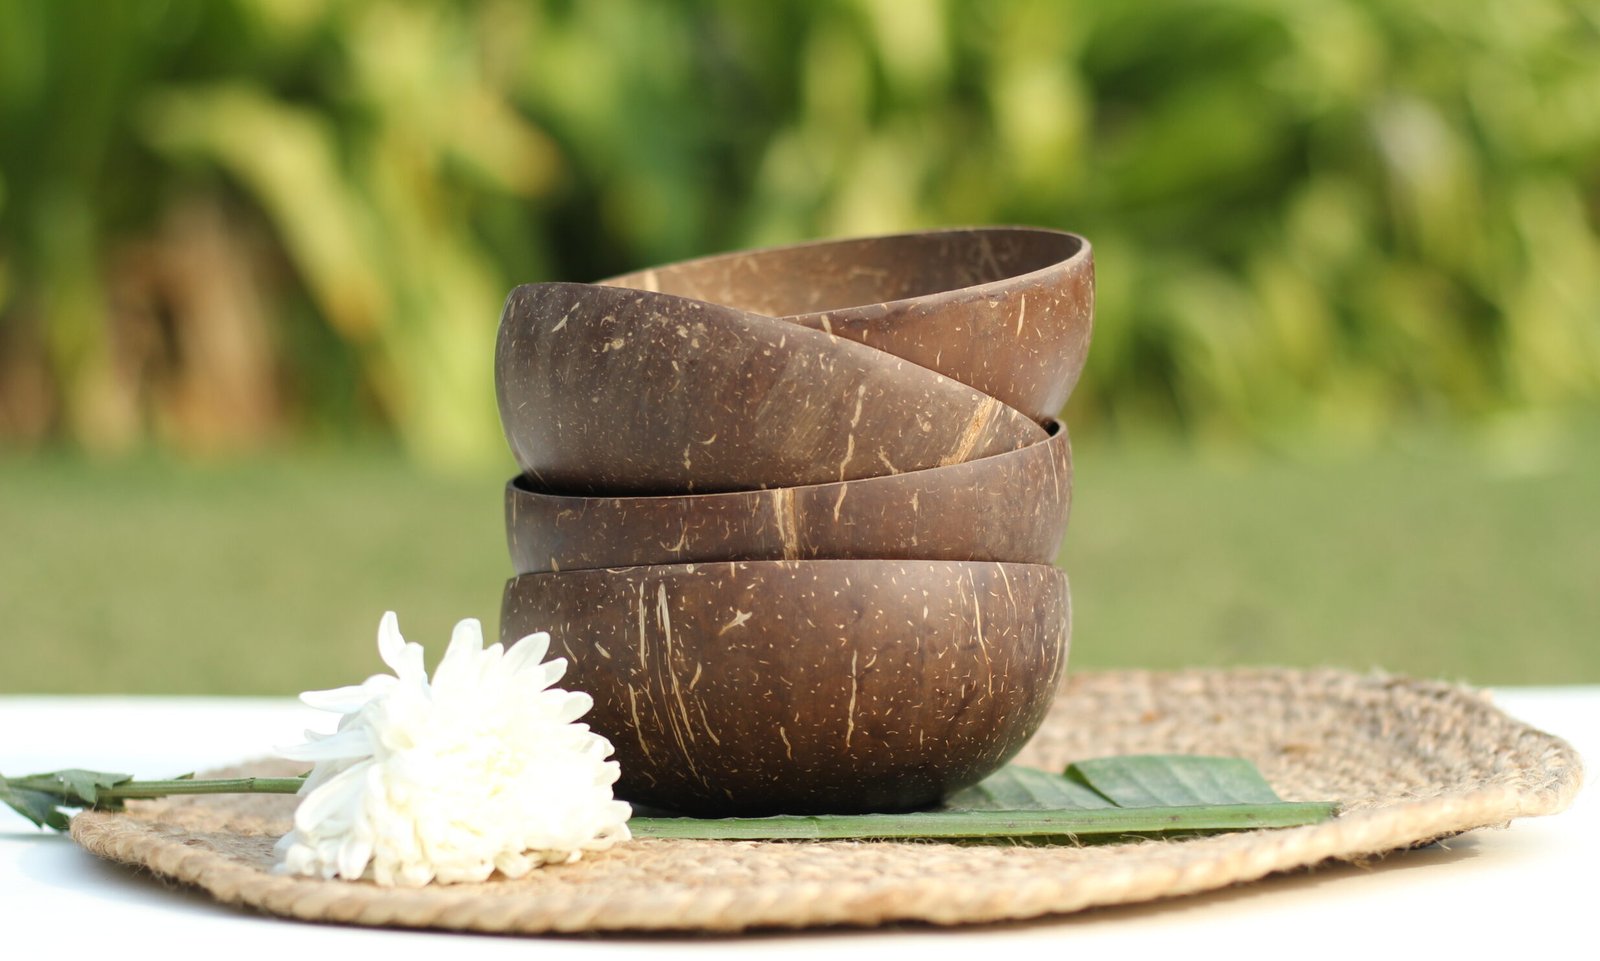 Coconut Shell Salad and fruit bowl in natural brown color with unique markings